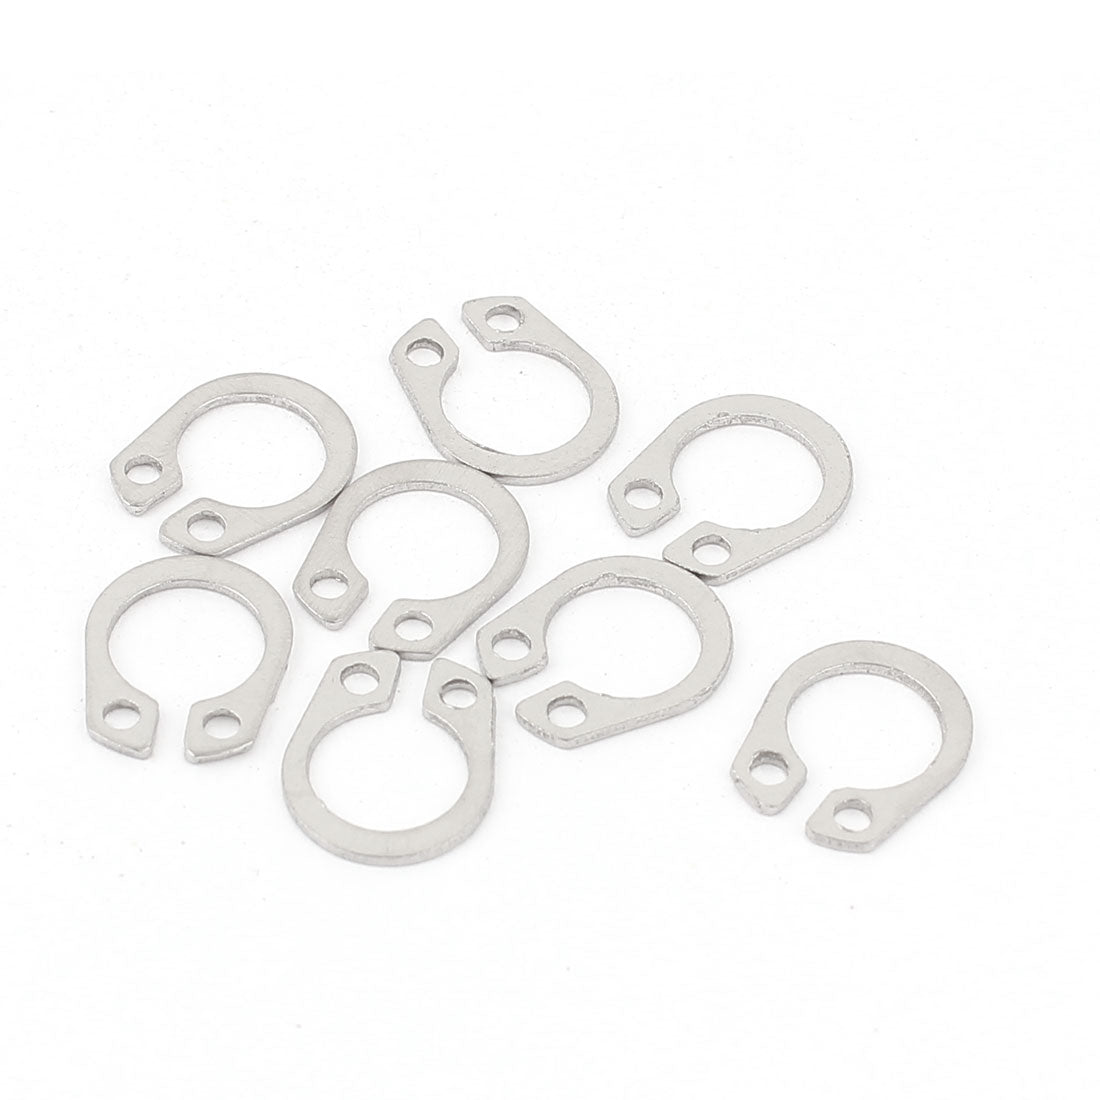 uxcell Uxcell 10pcs 304 Stainless Steel External Circlip Retaining Shaft Snap Rings 8mm